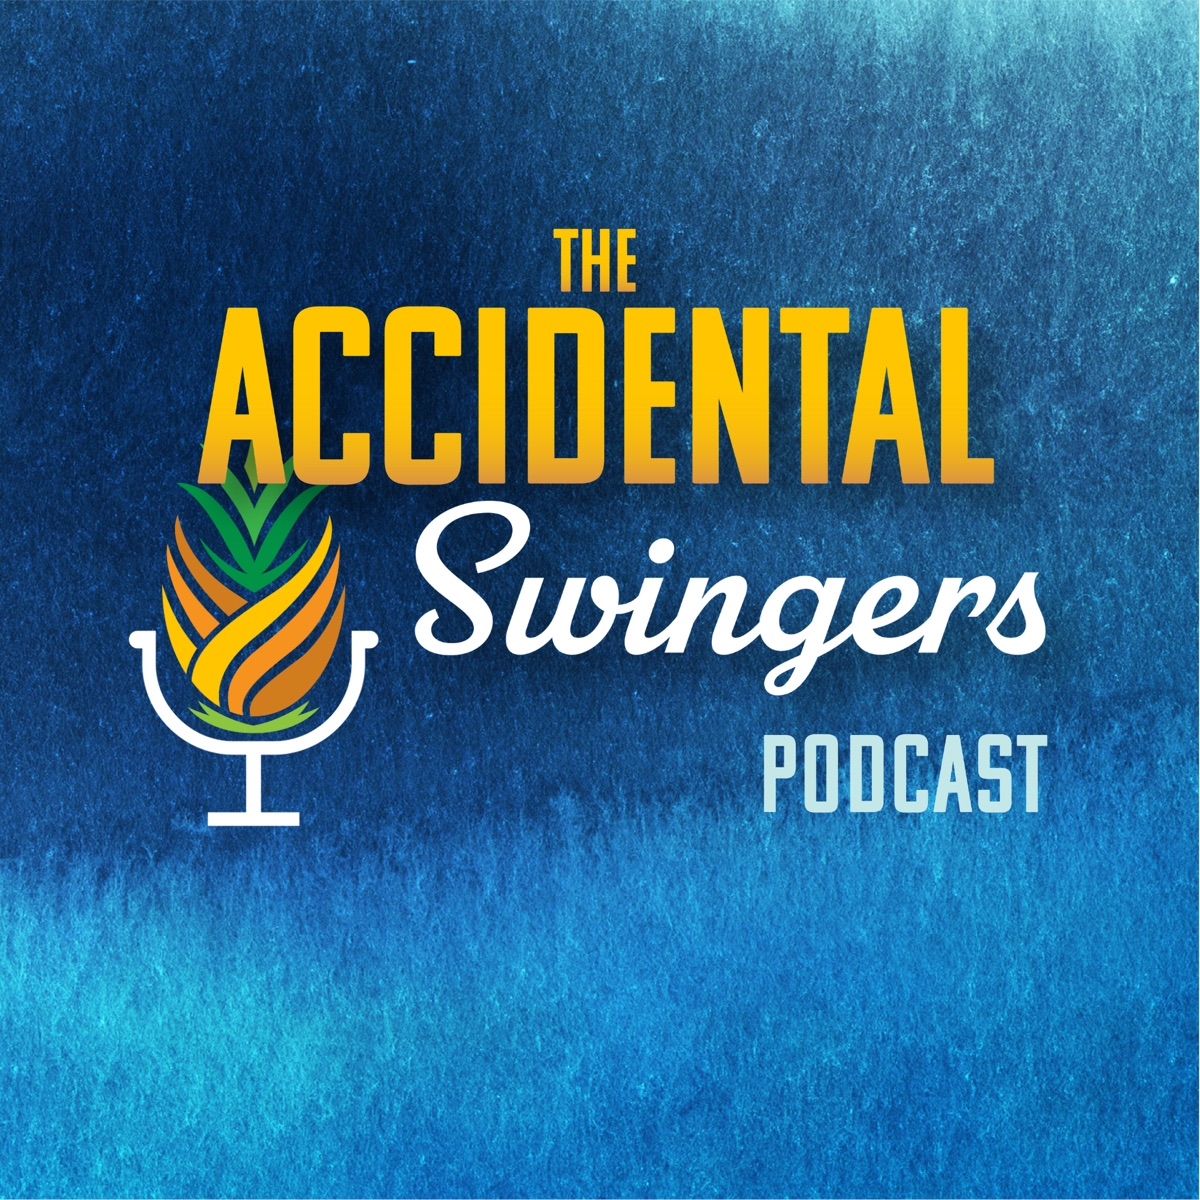 Accidental Swingers – Podcast image picture